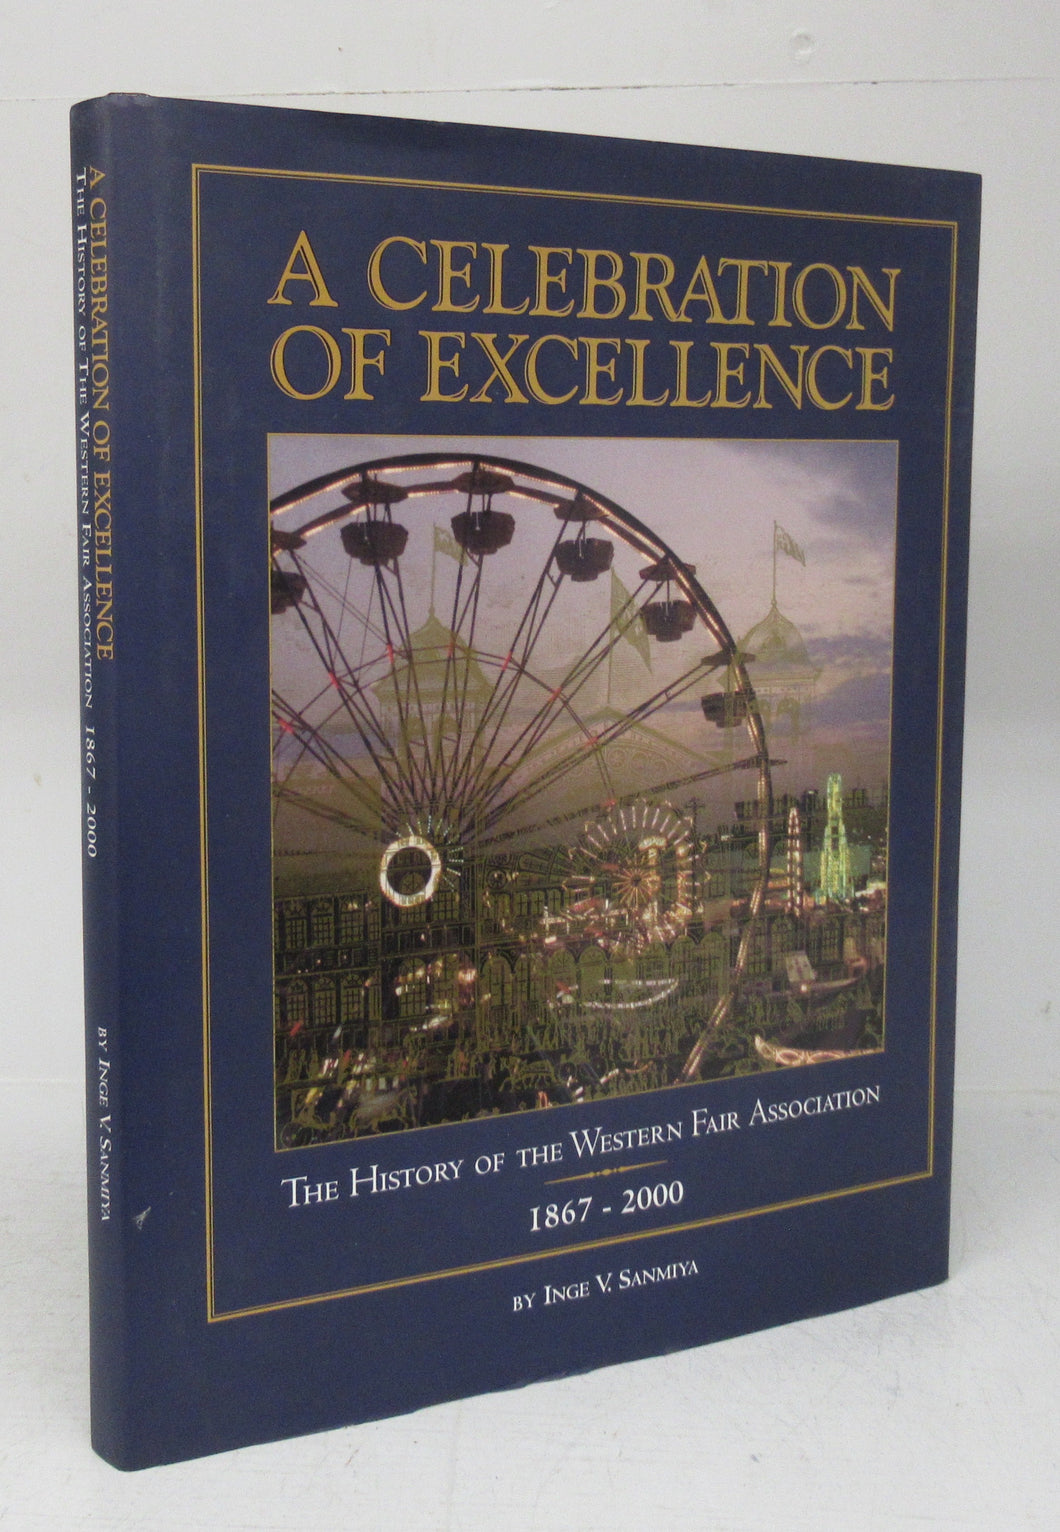 A Celebration of Excellence: The History of the Western Fair Association